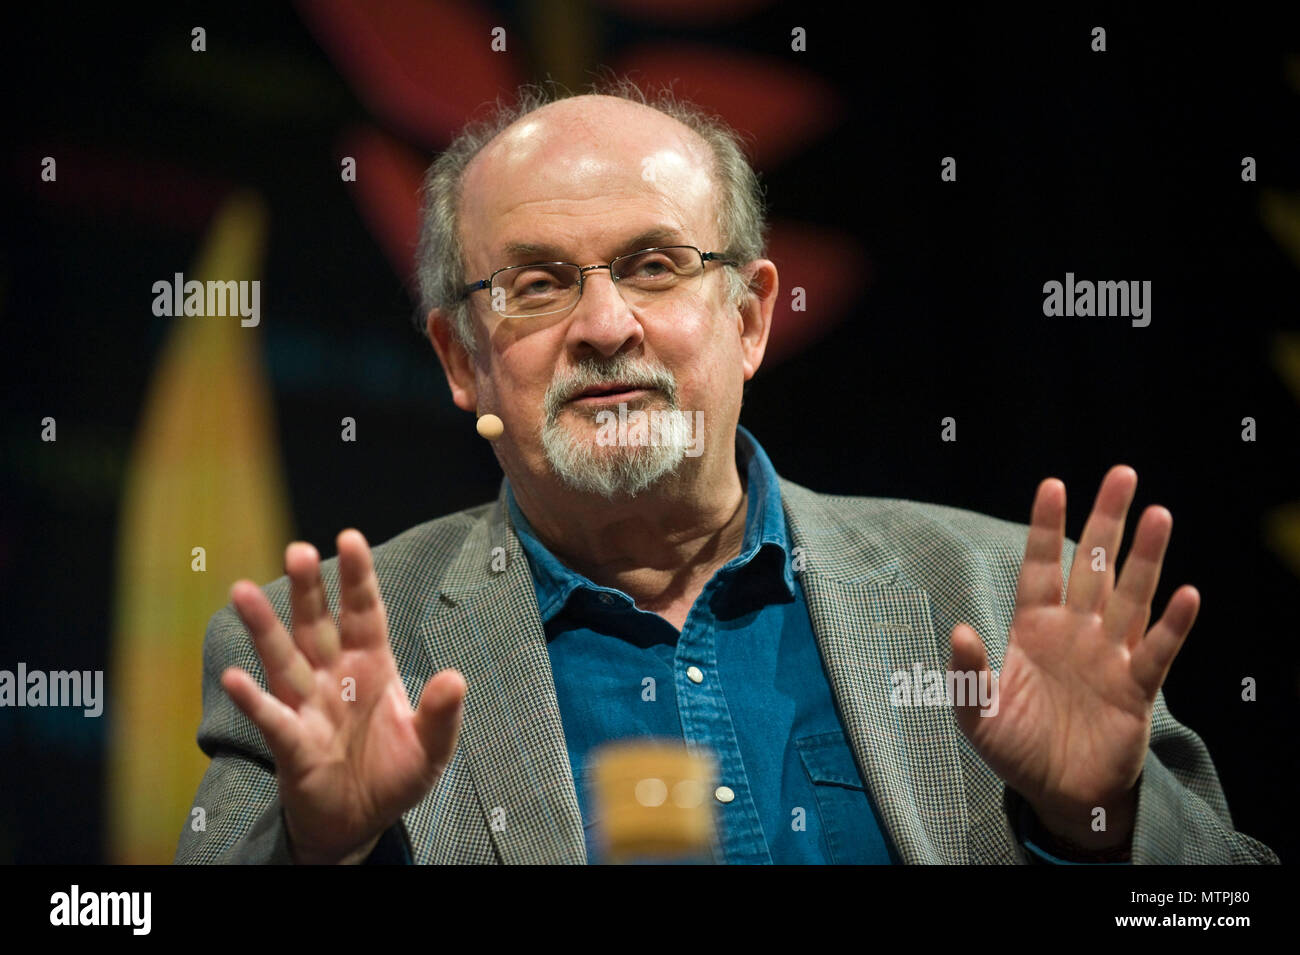 Salman Rushdie speaking on stage in the Tata Tent at Hay Festival 2018 Hay-on-Wye Powys Wales UK Stock Photo